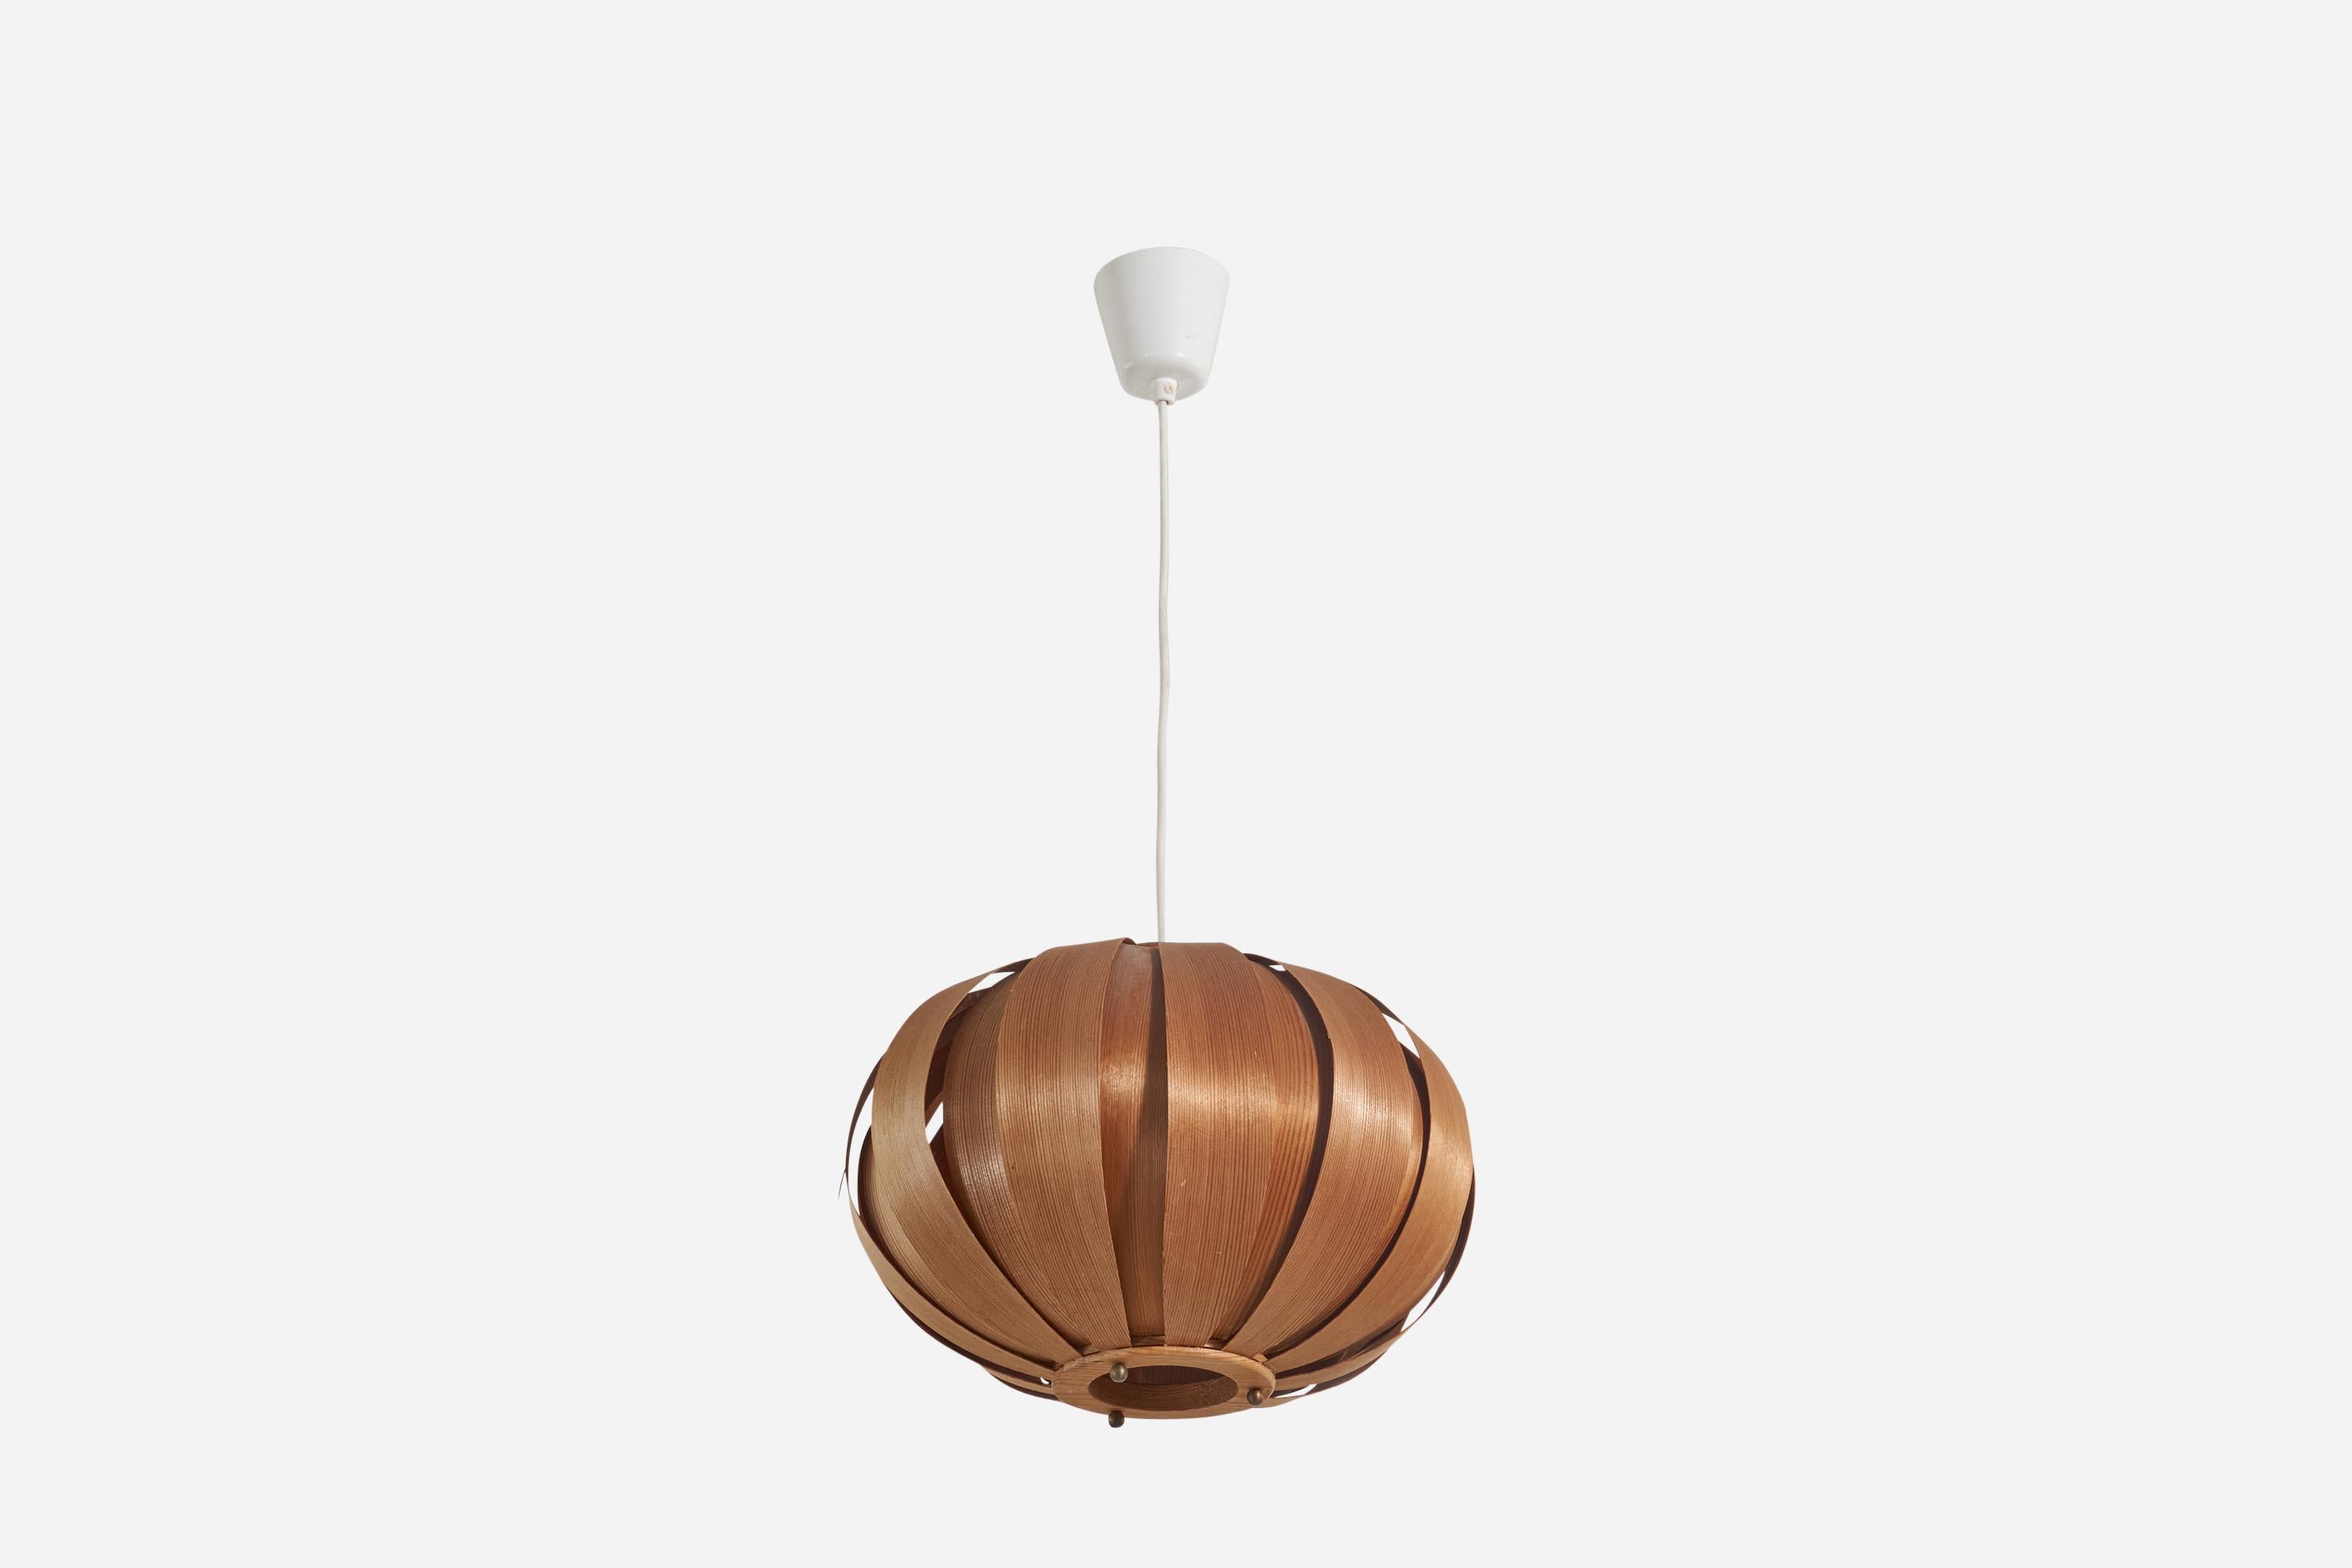 A moulded pine veneer pendant light designed and produced by Hans-Agne Jakobsson, Sweden, 1970s.

Dimensions variable, measured as illustrated in first image.

Dimensions of canopy (inches) : 3.45 x 3.37 x 3.37 (height x width x depth)

Socket